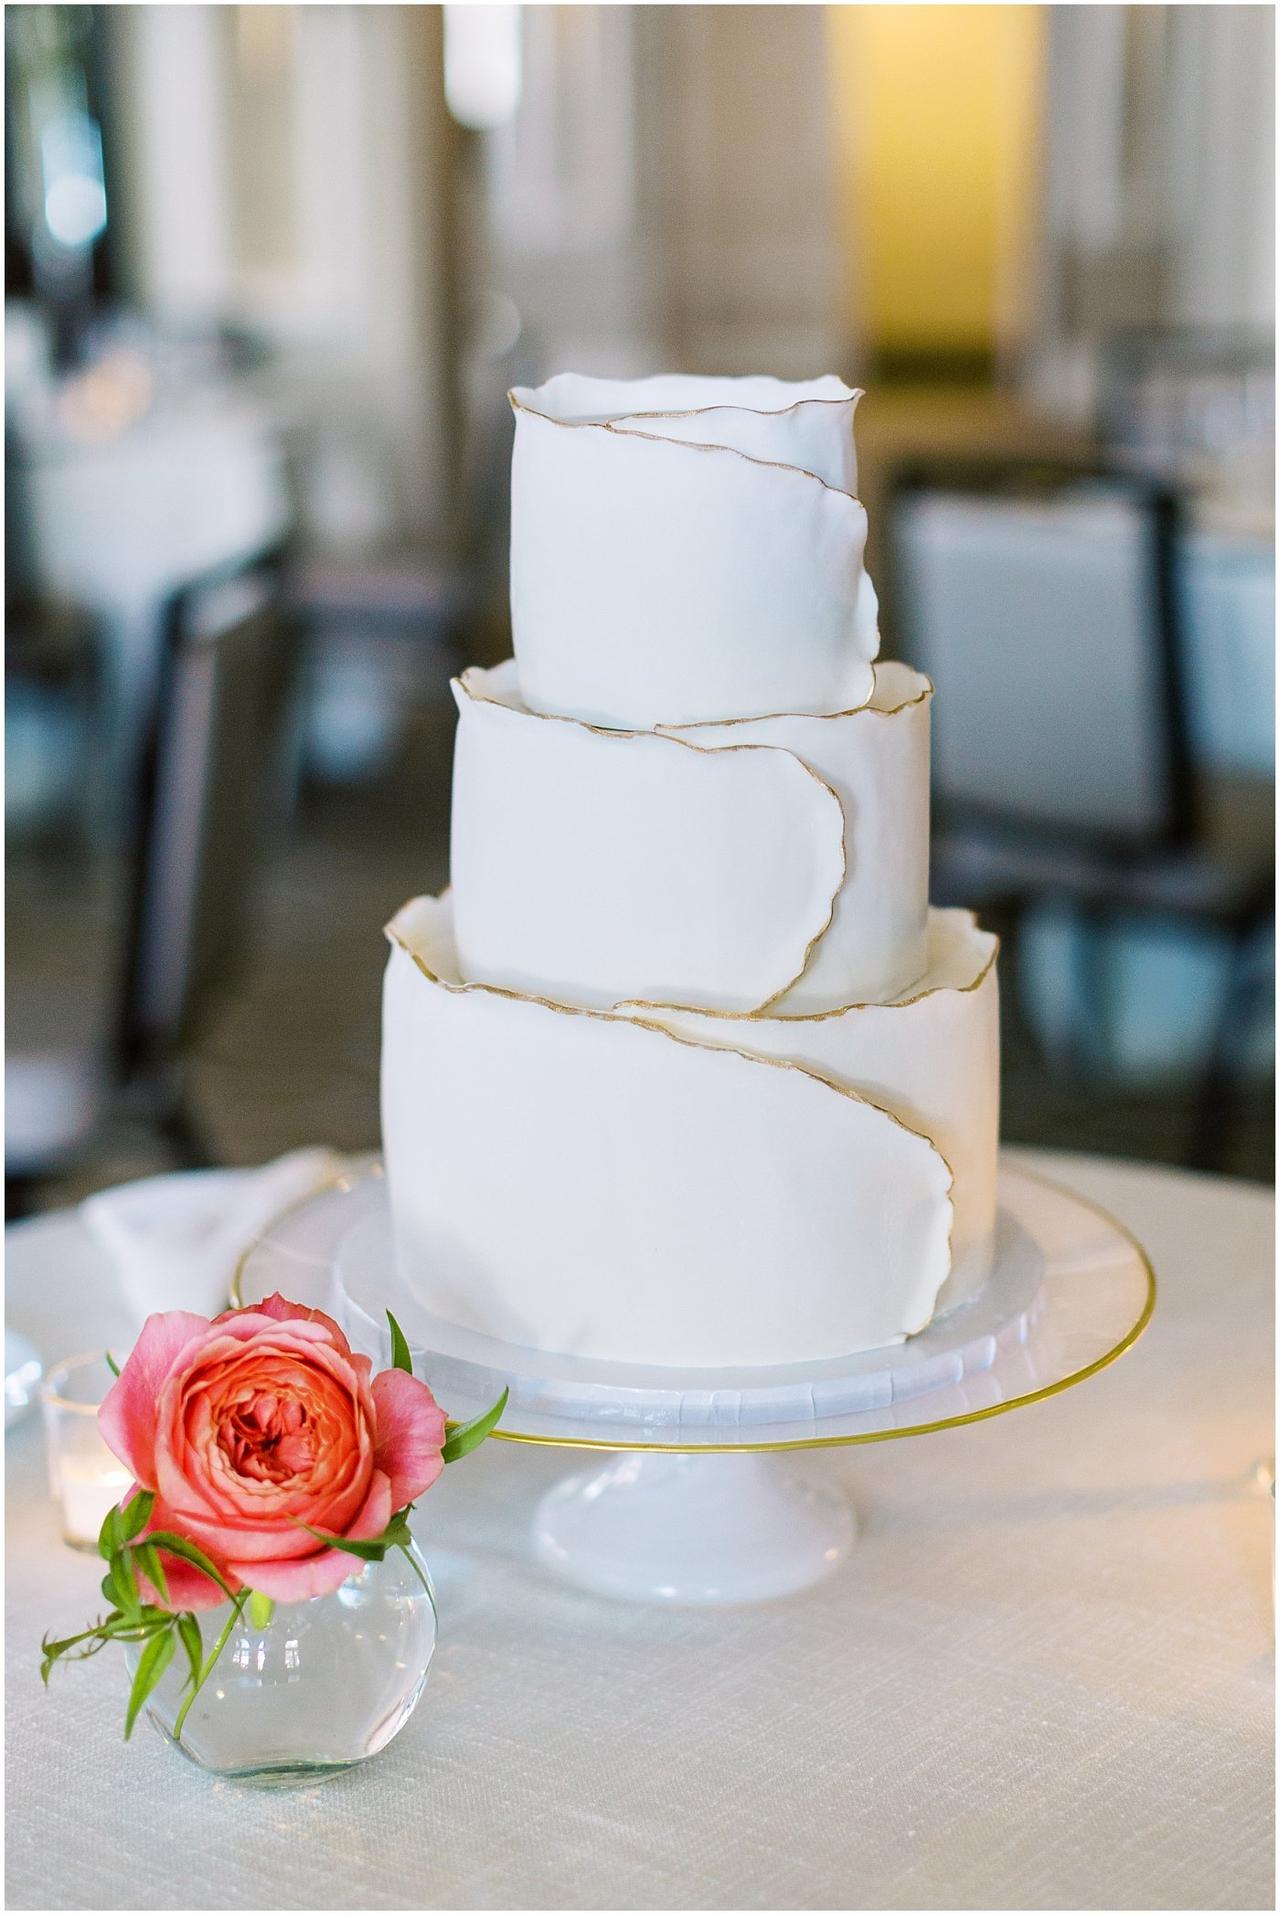 Wrapped icing simple wedding cake